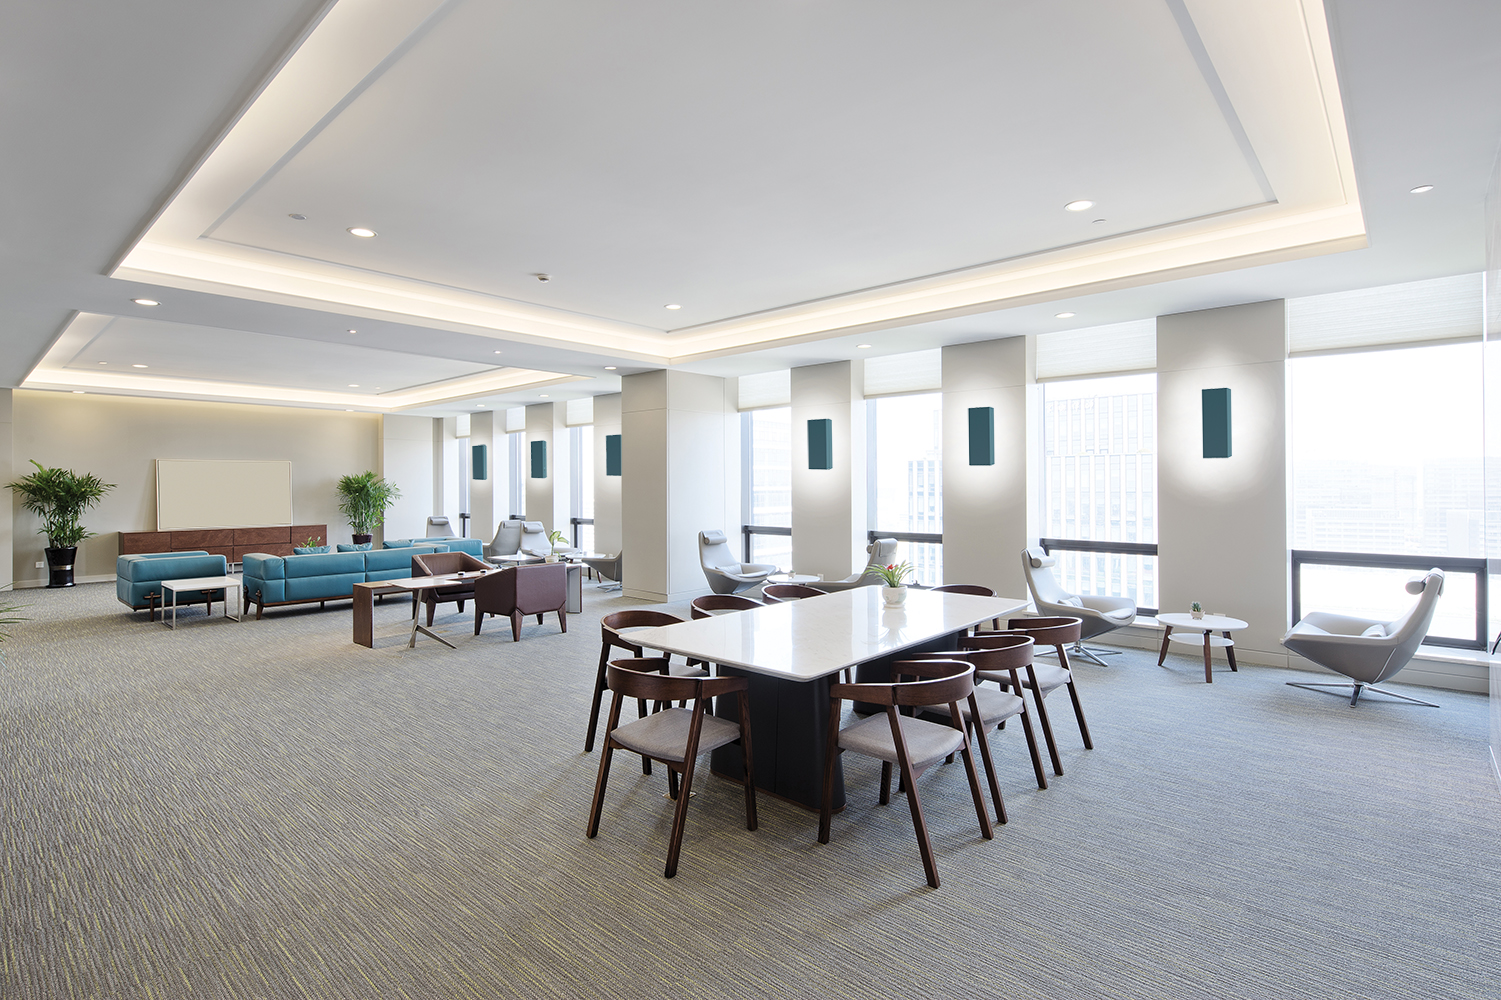 Shield sconces provide attractive indirect light in a large meeting room area for relaxing office lighting design.